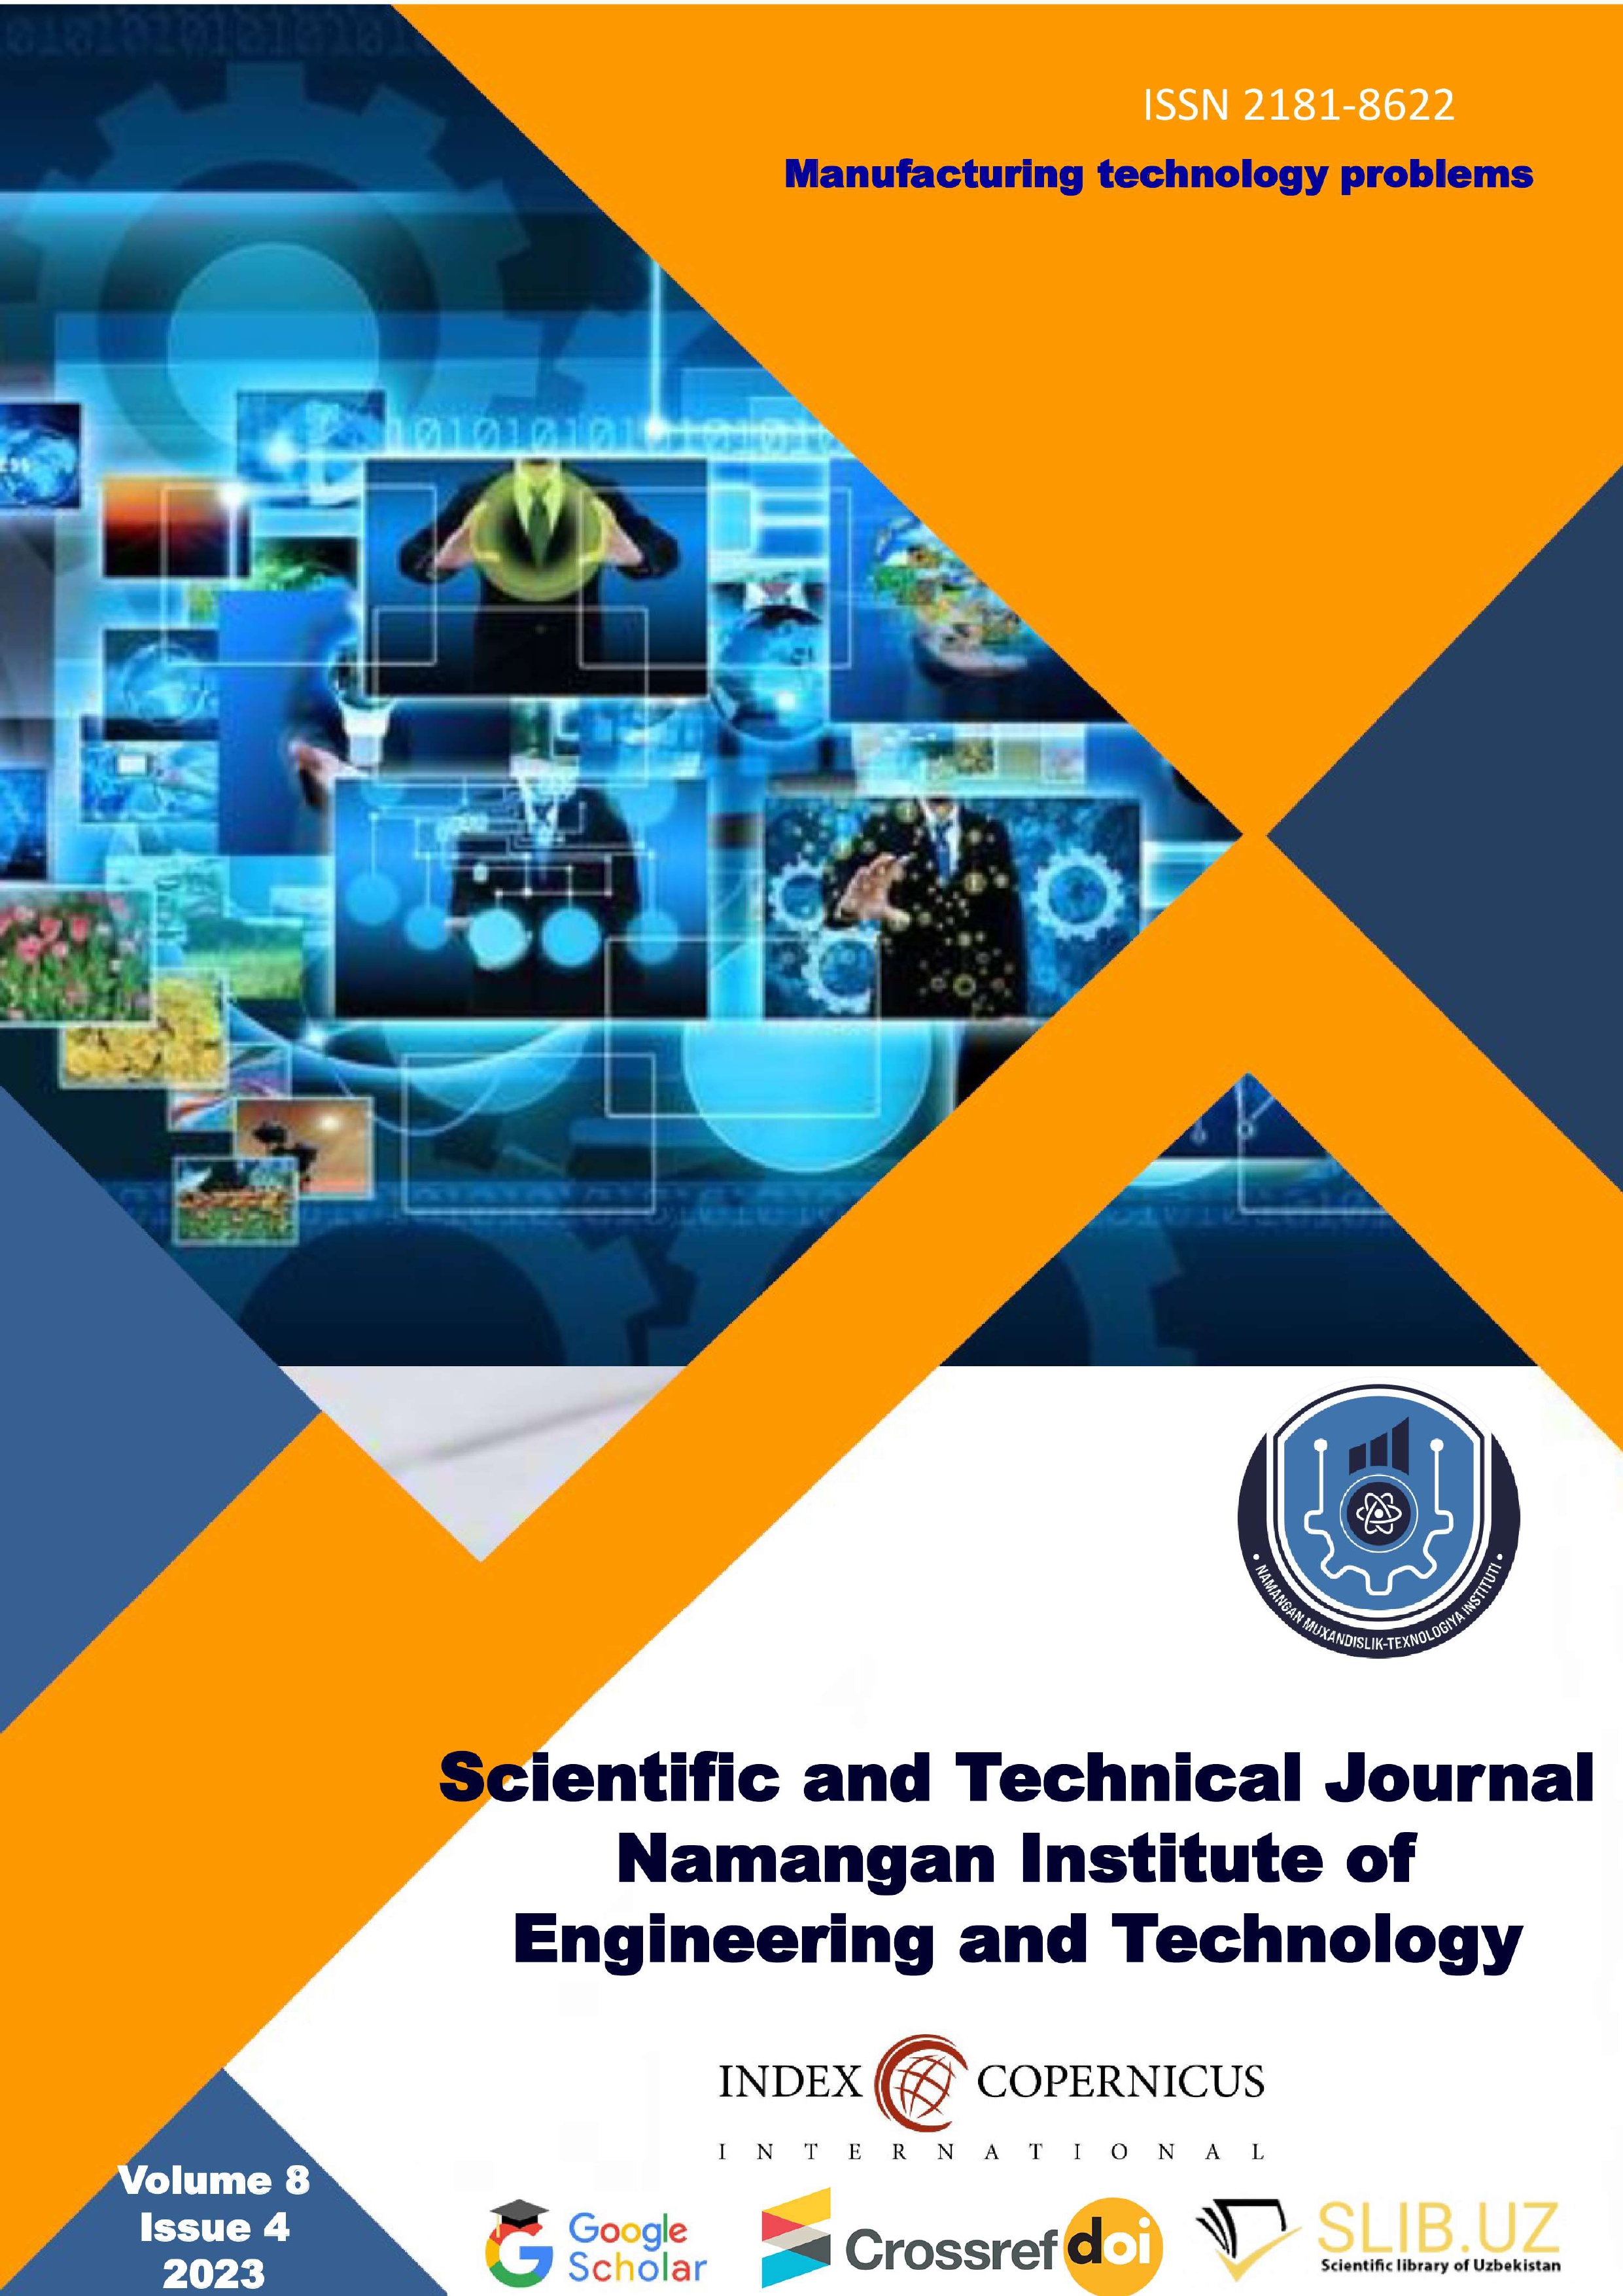 					View Vol. 9 No. 1 (2024): Scientific and Technical Journal of Namangan Institute of Engineering and Technology
				